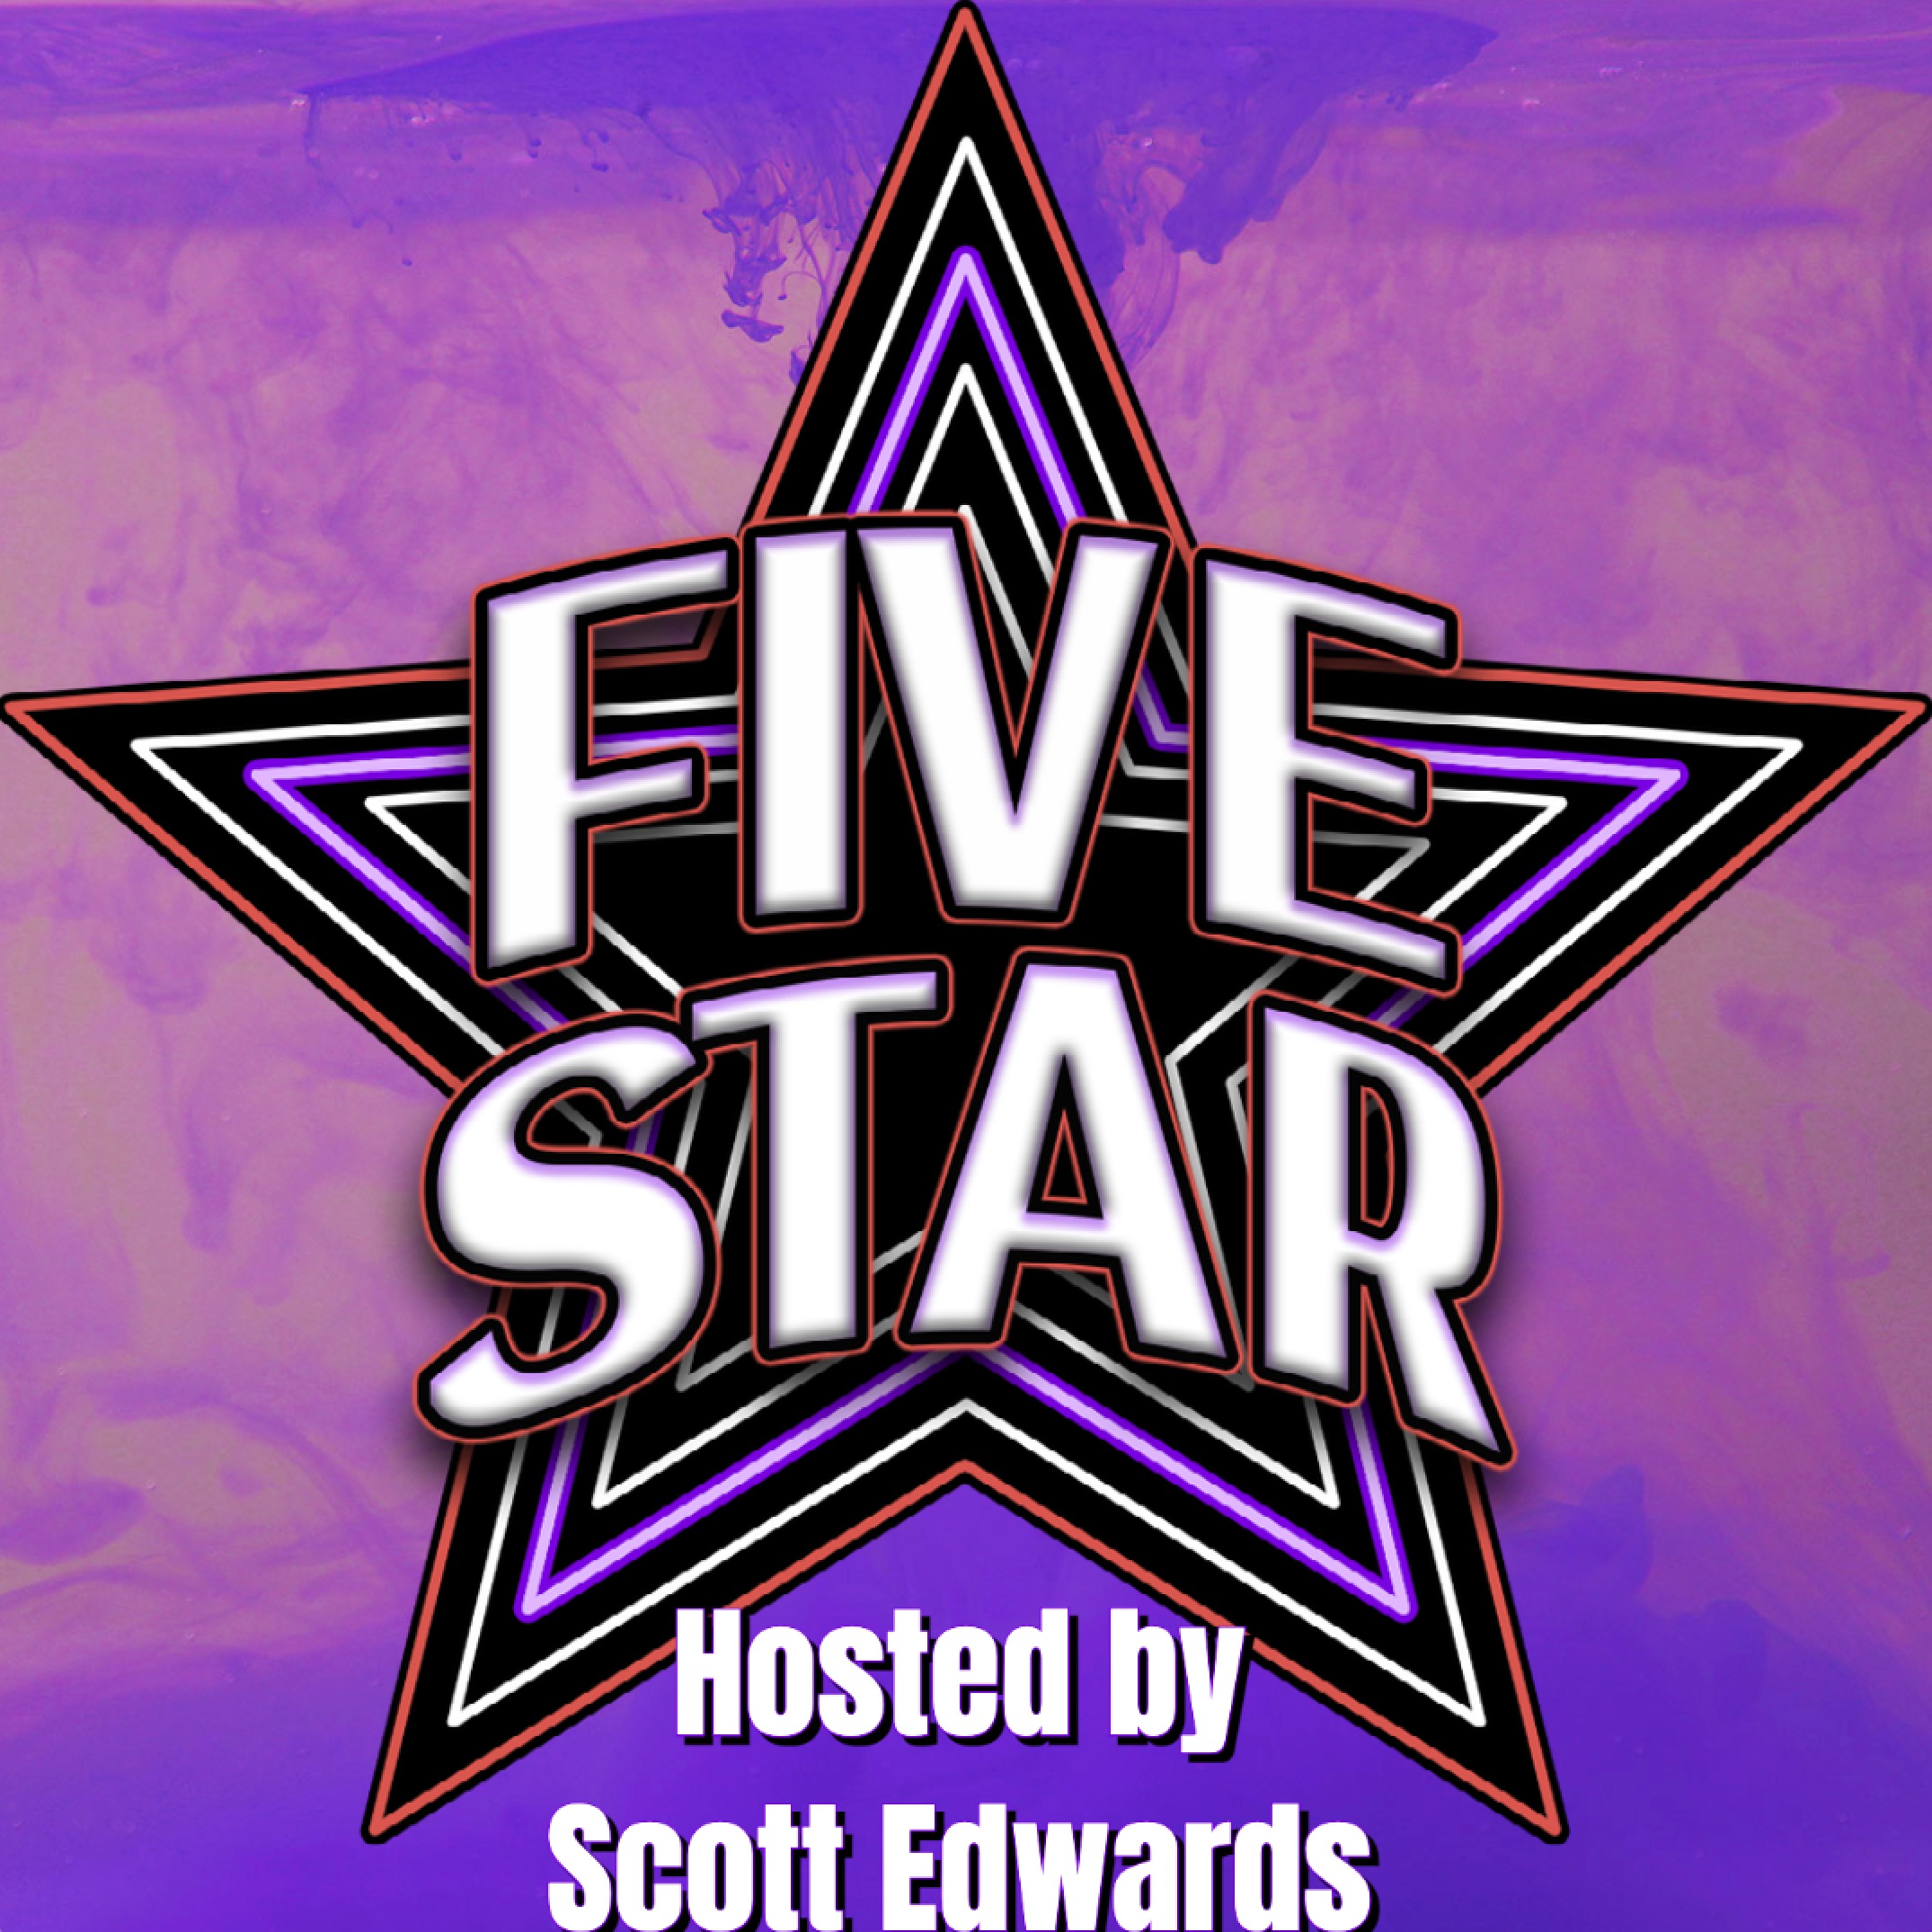 The Five Star Joshi Show - CRAZY STAR, FWC Steal Show | Marigold Fields Forever Preview